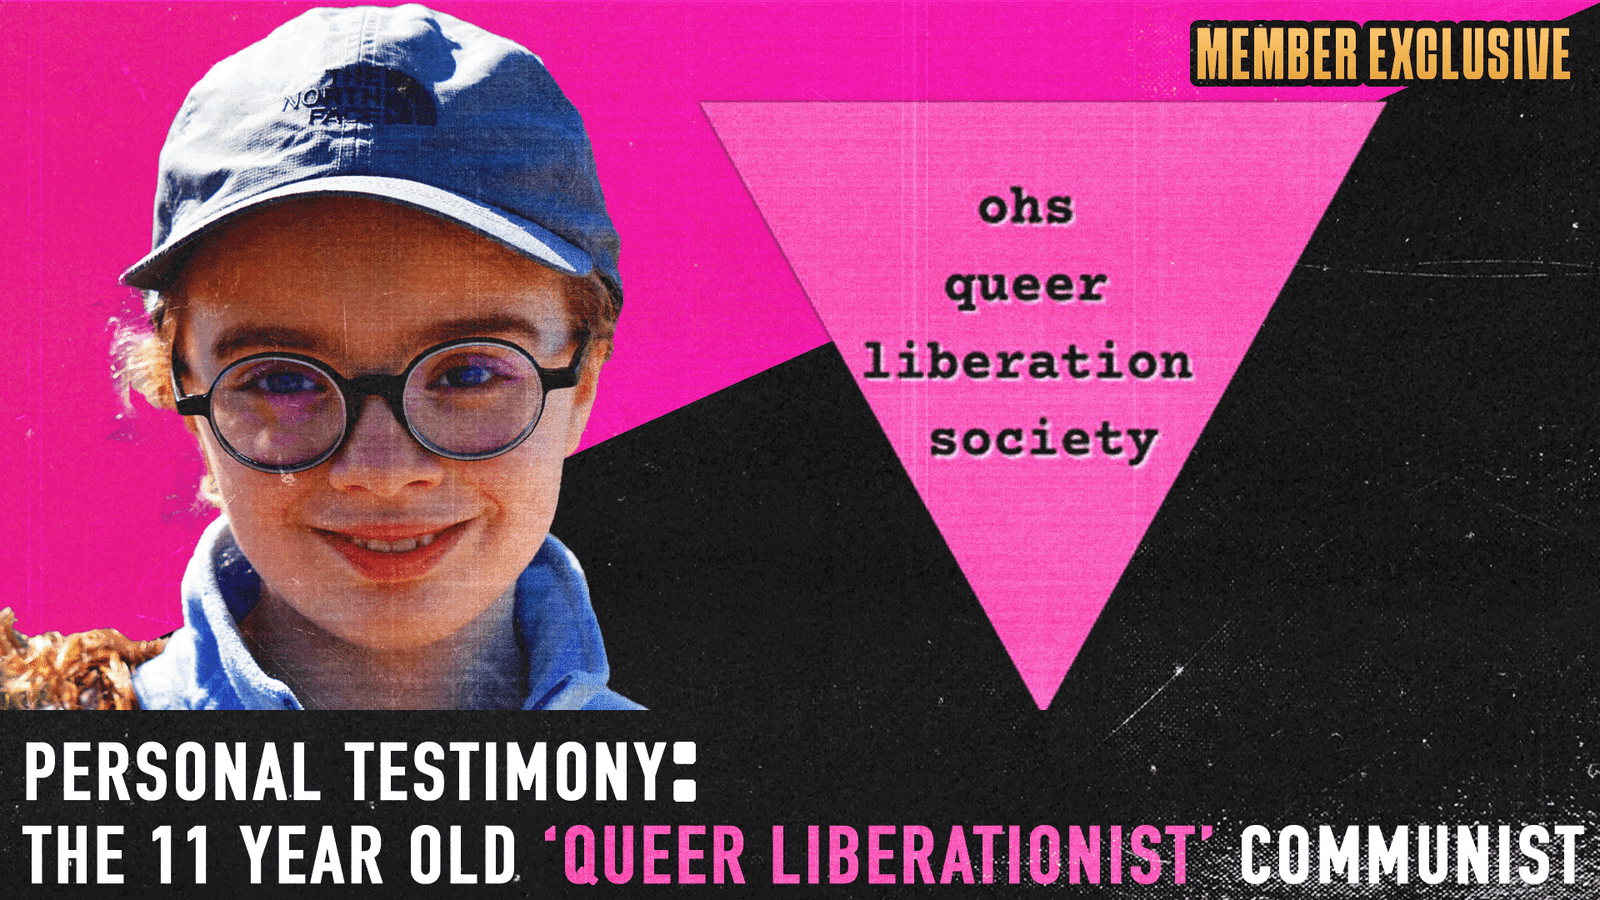 Child Explains How She Became A ‘Queer Liberationist’ Communist At 11 Years Old